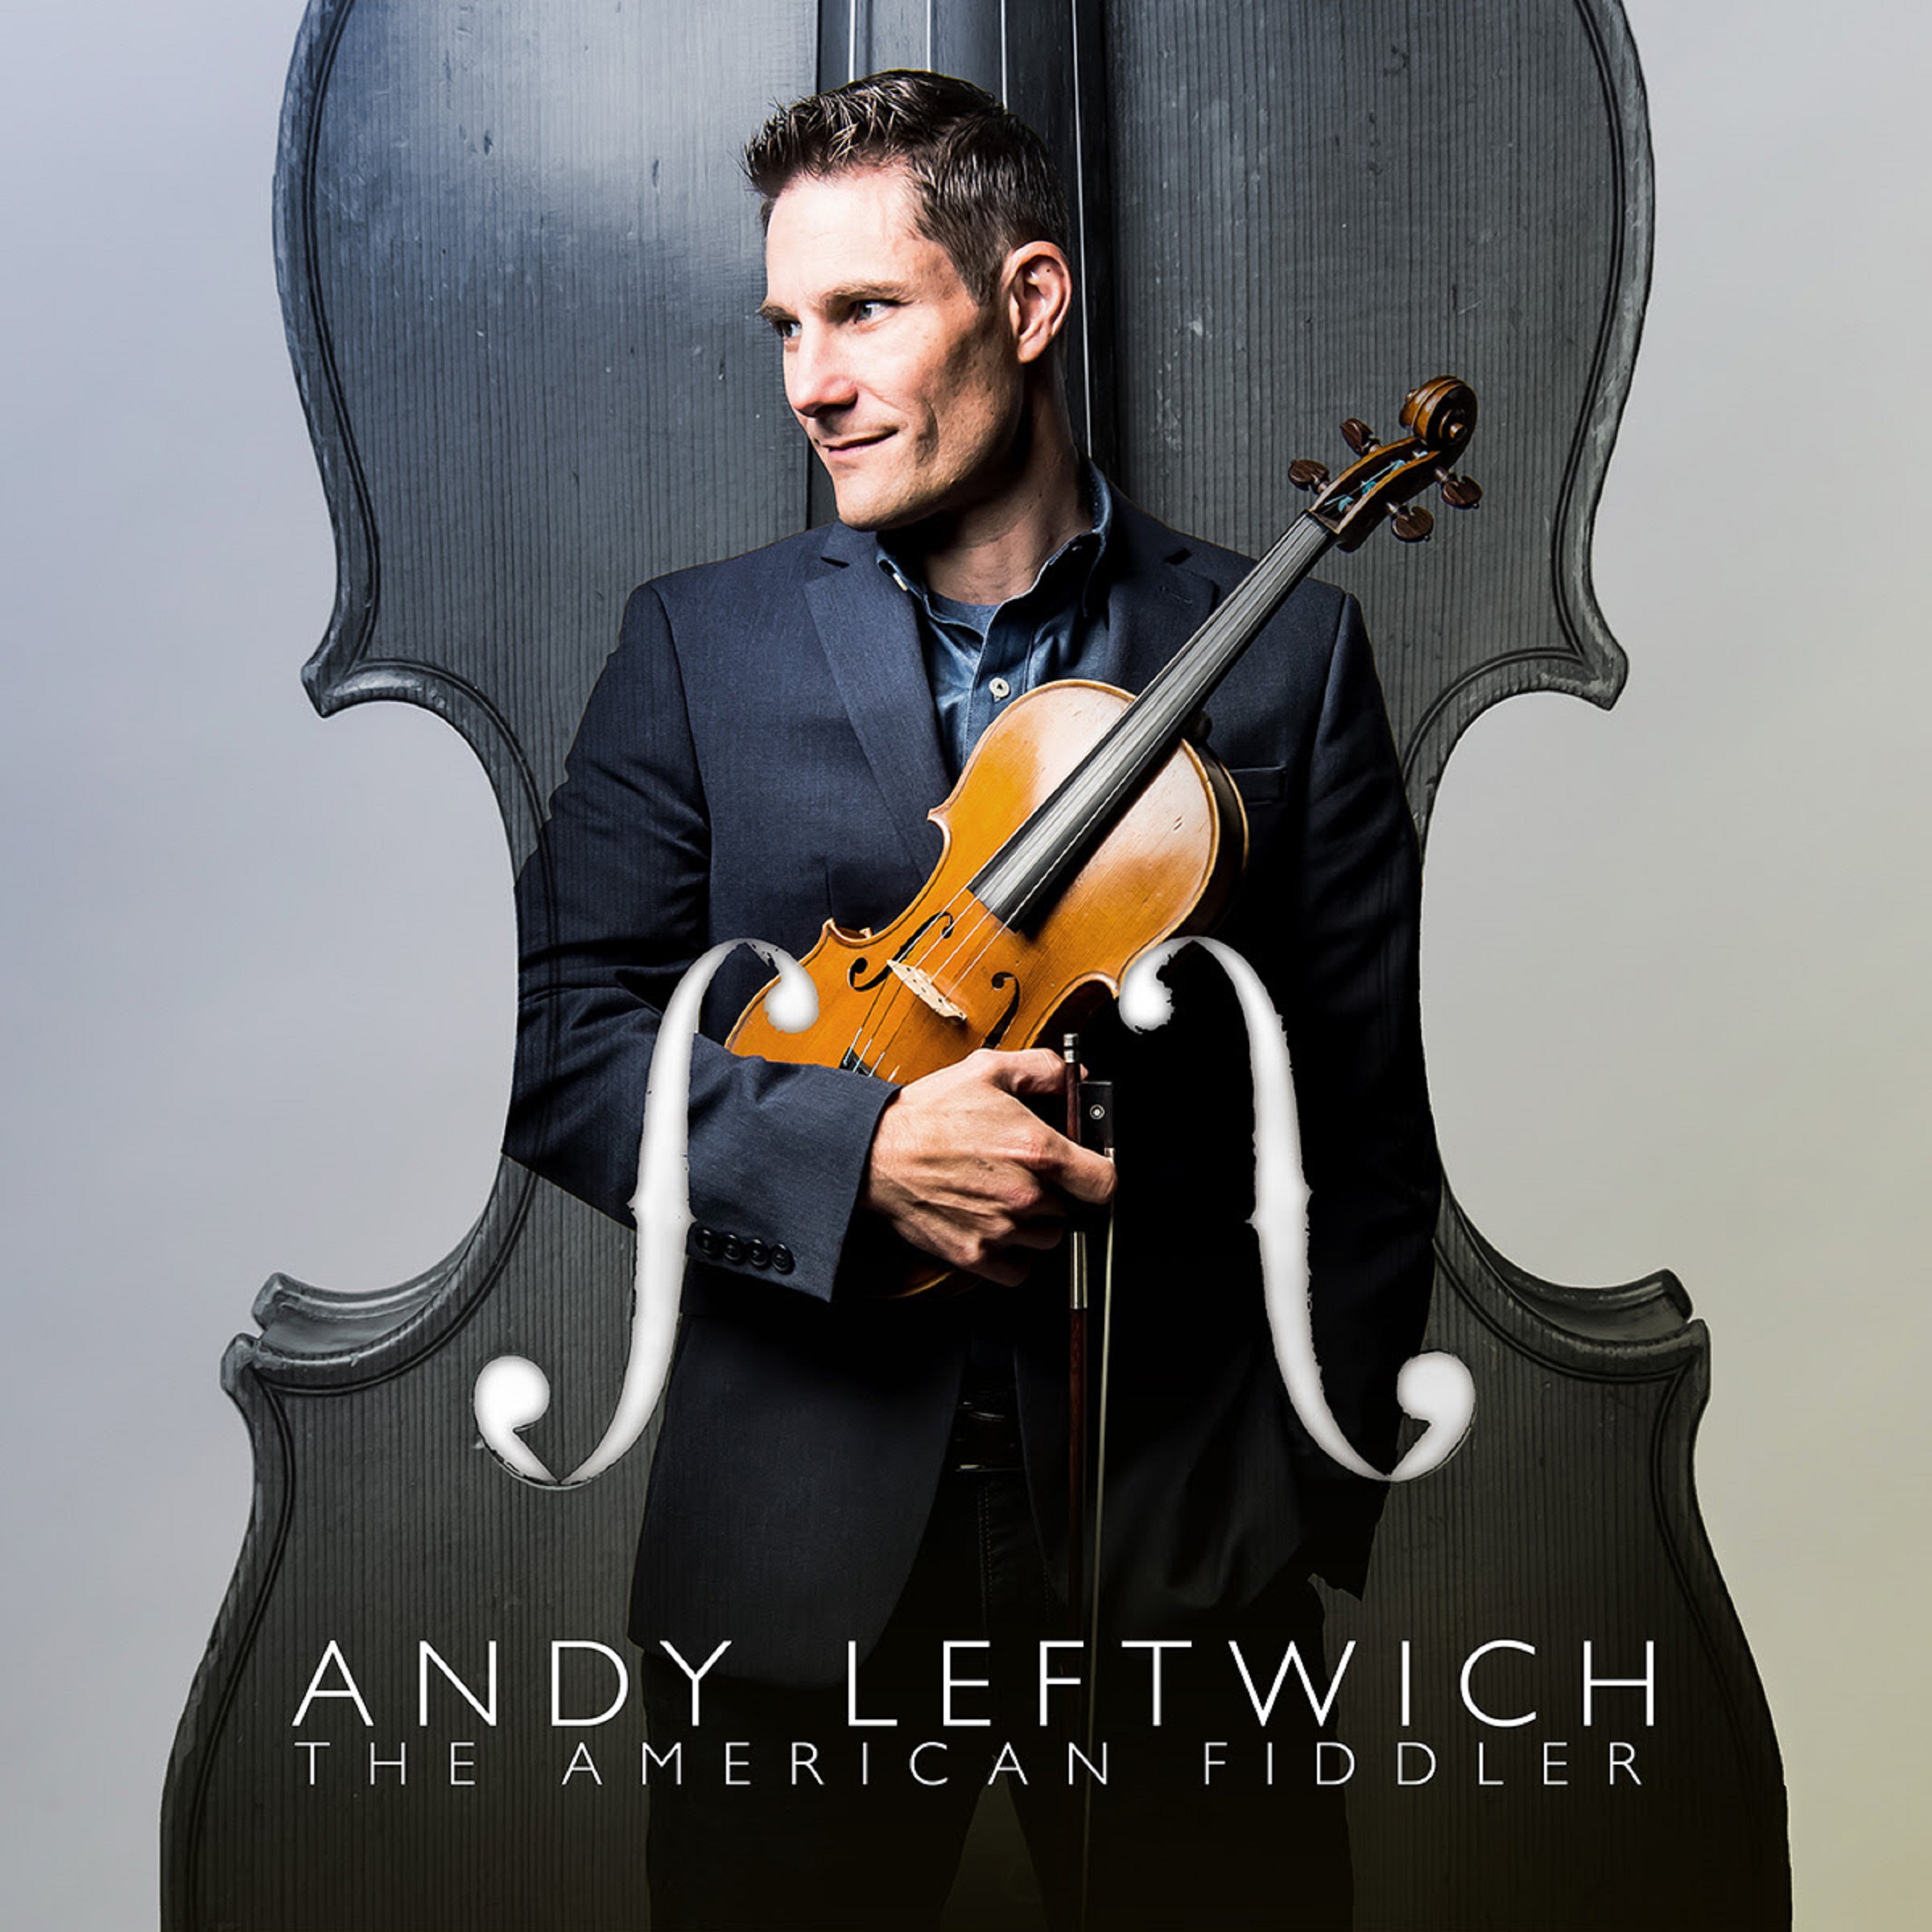 Andy Leftwich’s The American Fiddler puts his instrumental prowess in the spotlight